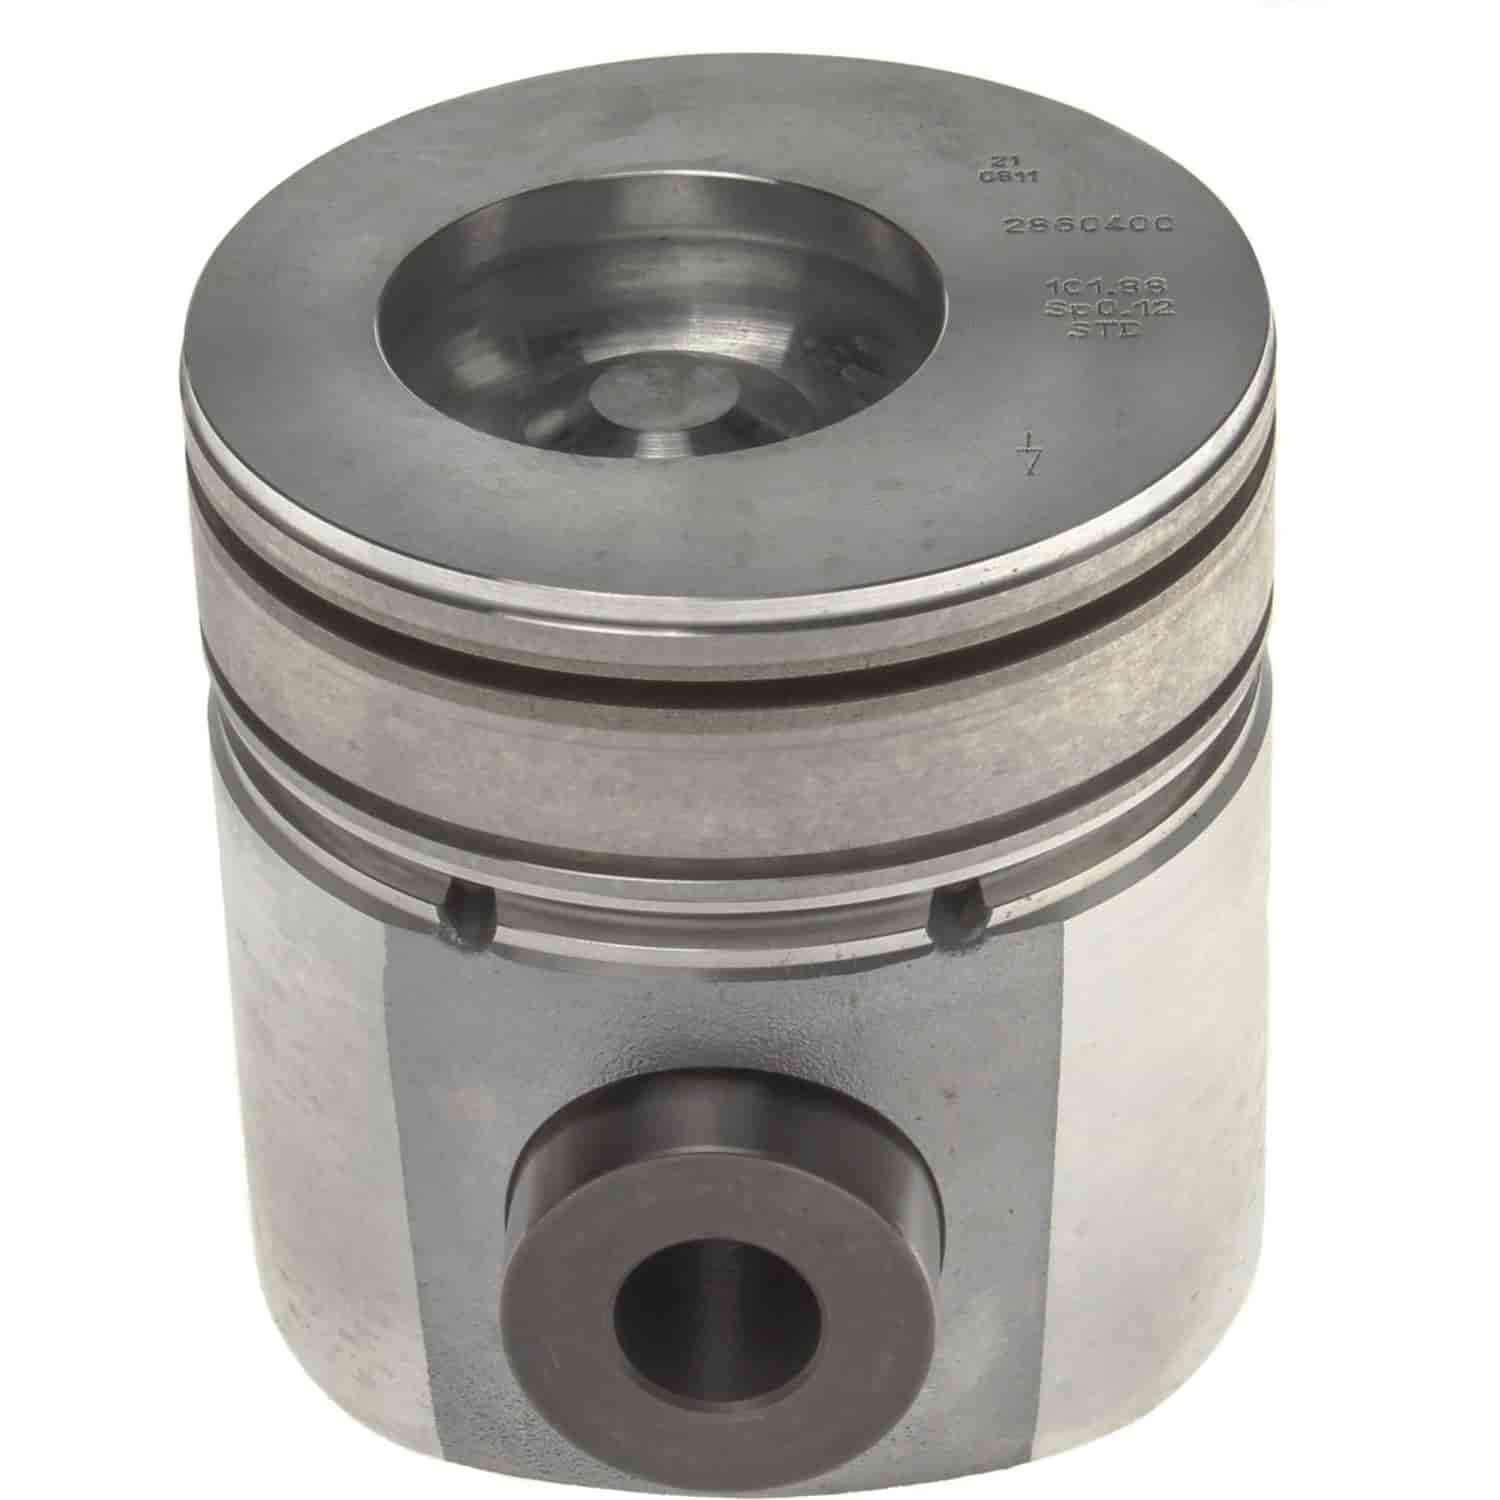 Piston Set With Rings 1994-1998 Dodge, Fits Cummins Diesel L6 5.9L with 4.016" Bore (Standard)